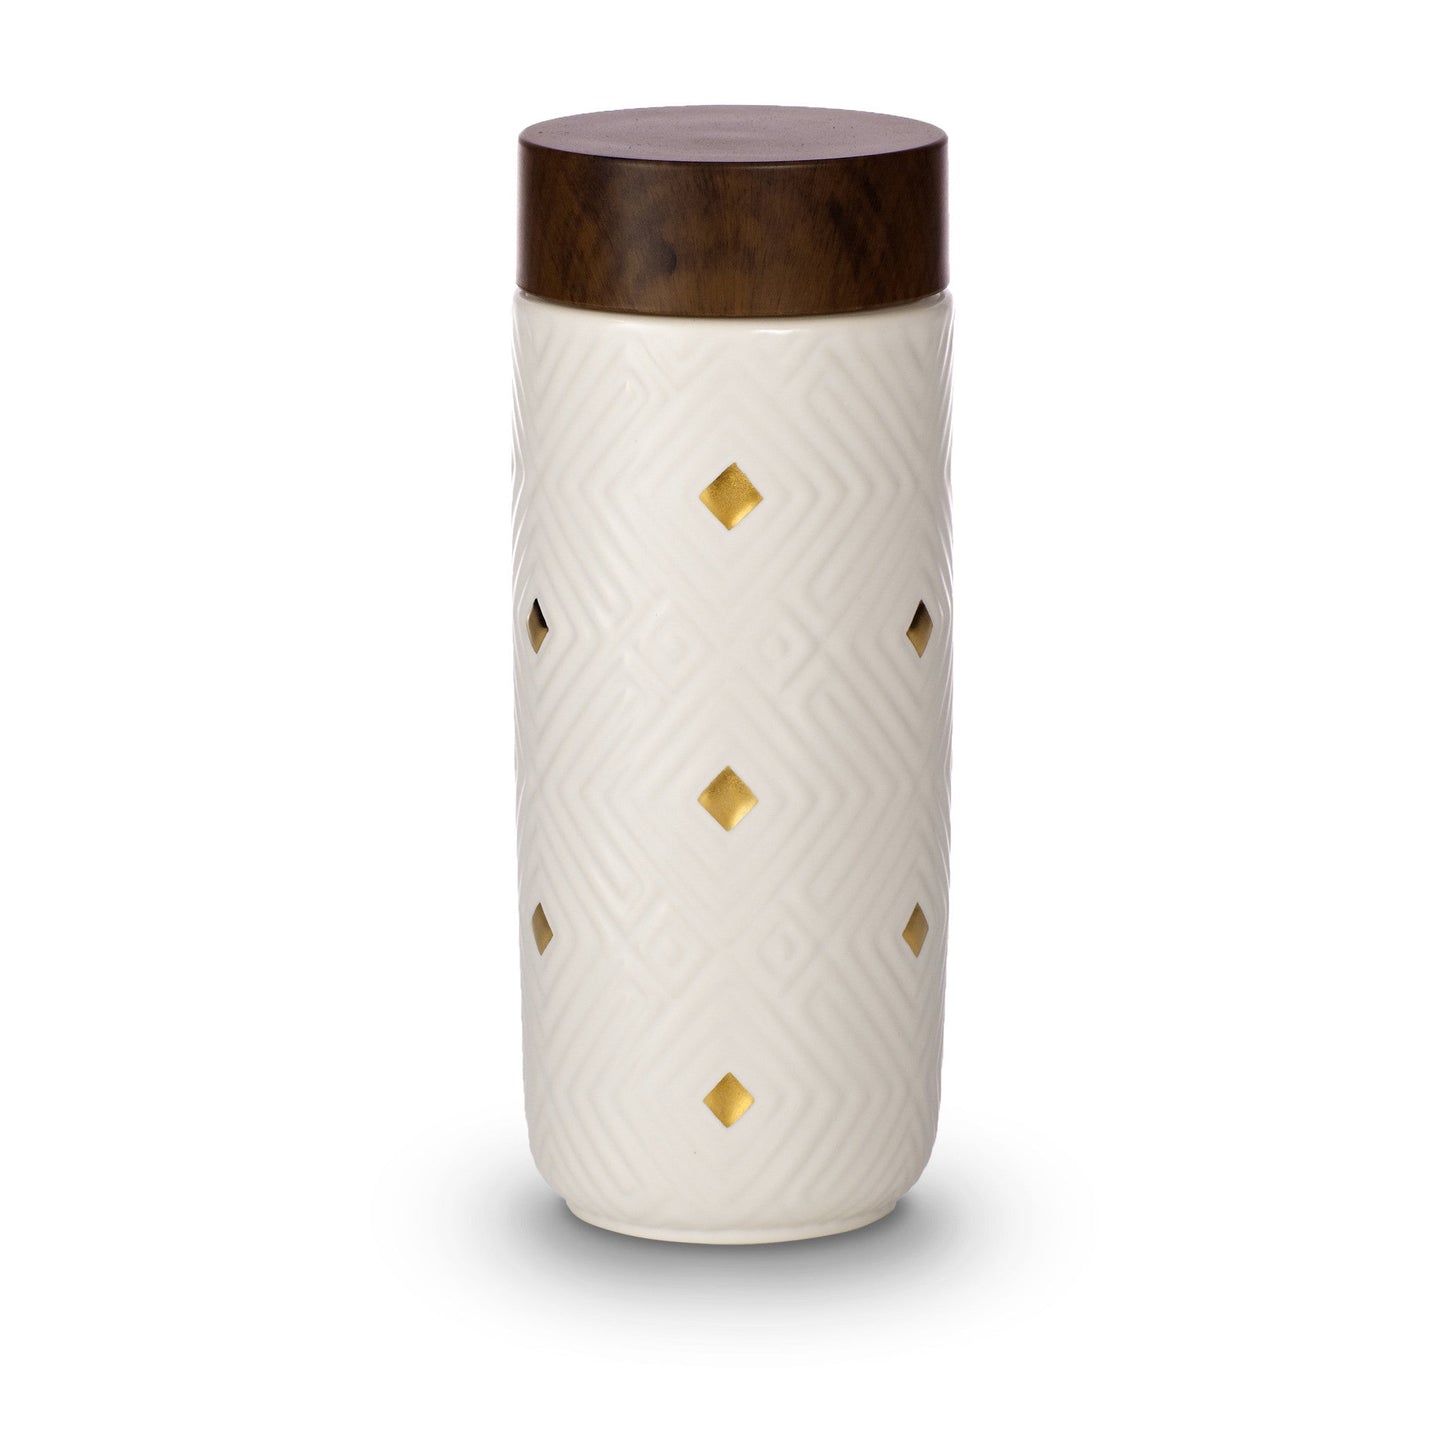 The Miracle Gold Ceramic Tumbler by ACERA LIVEN